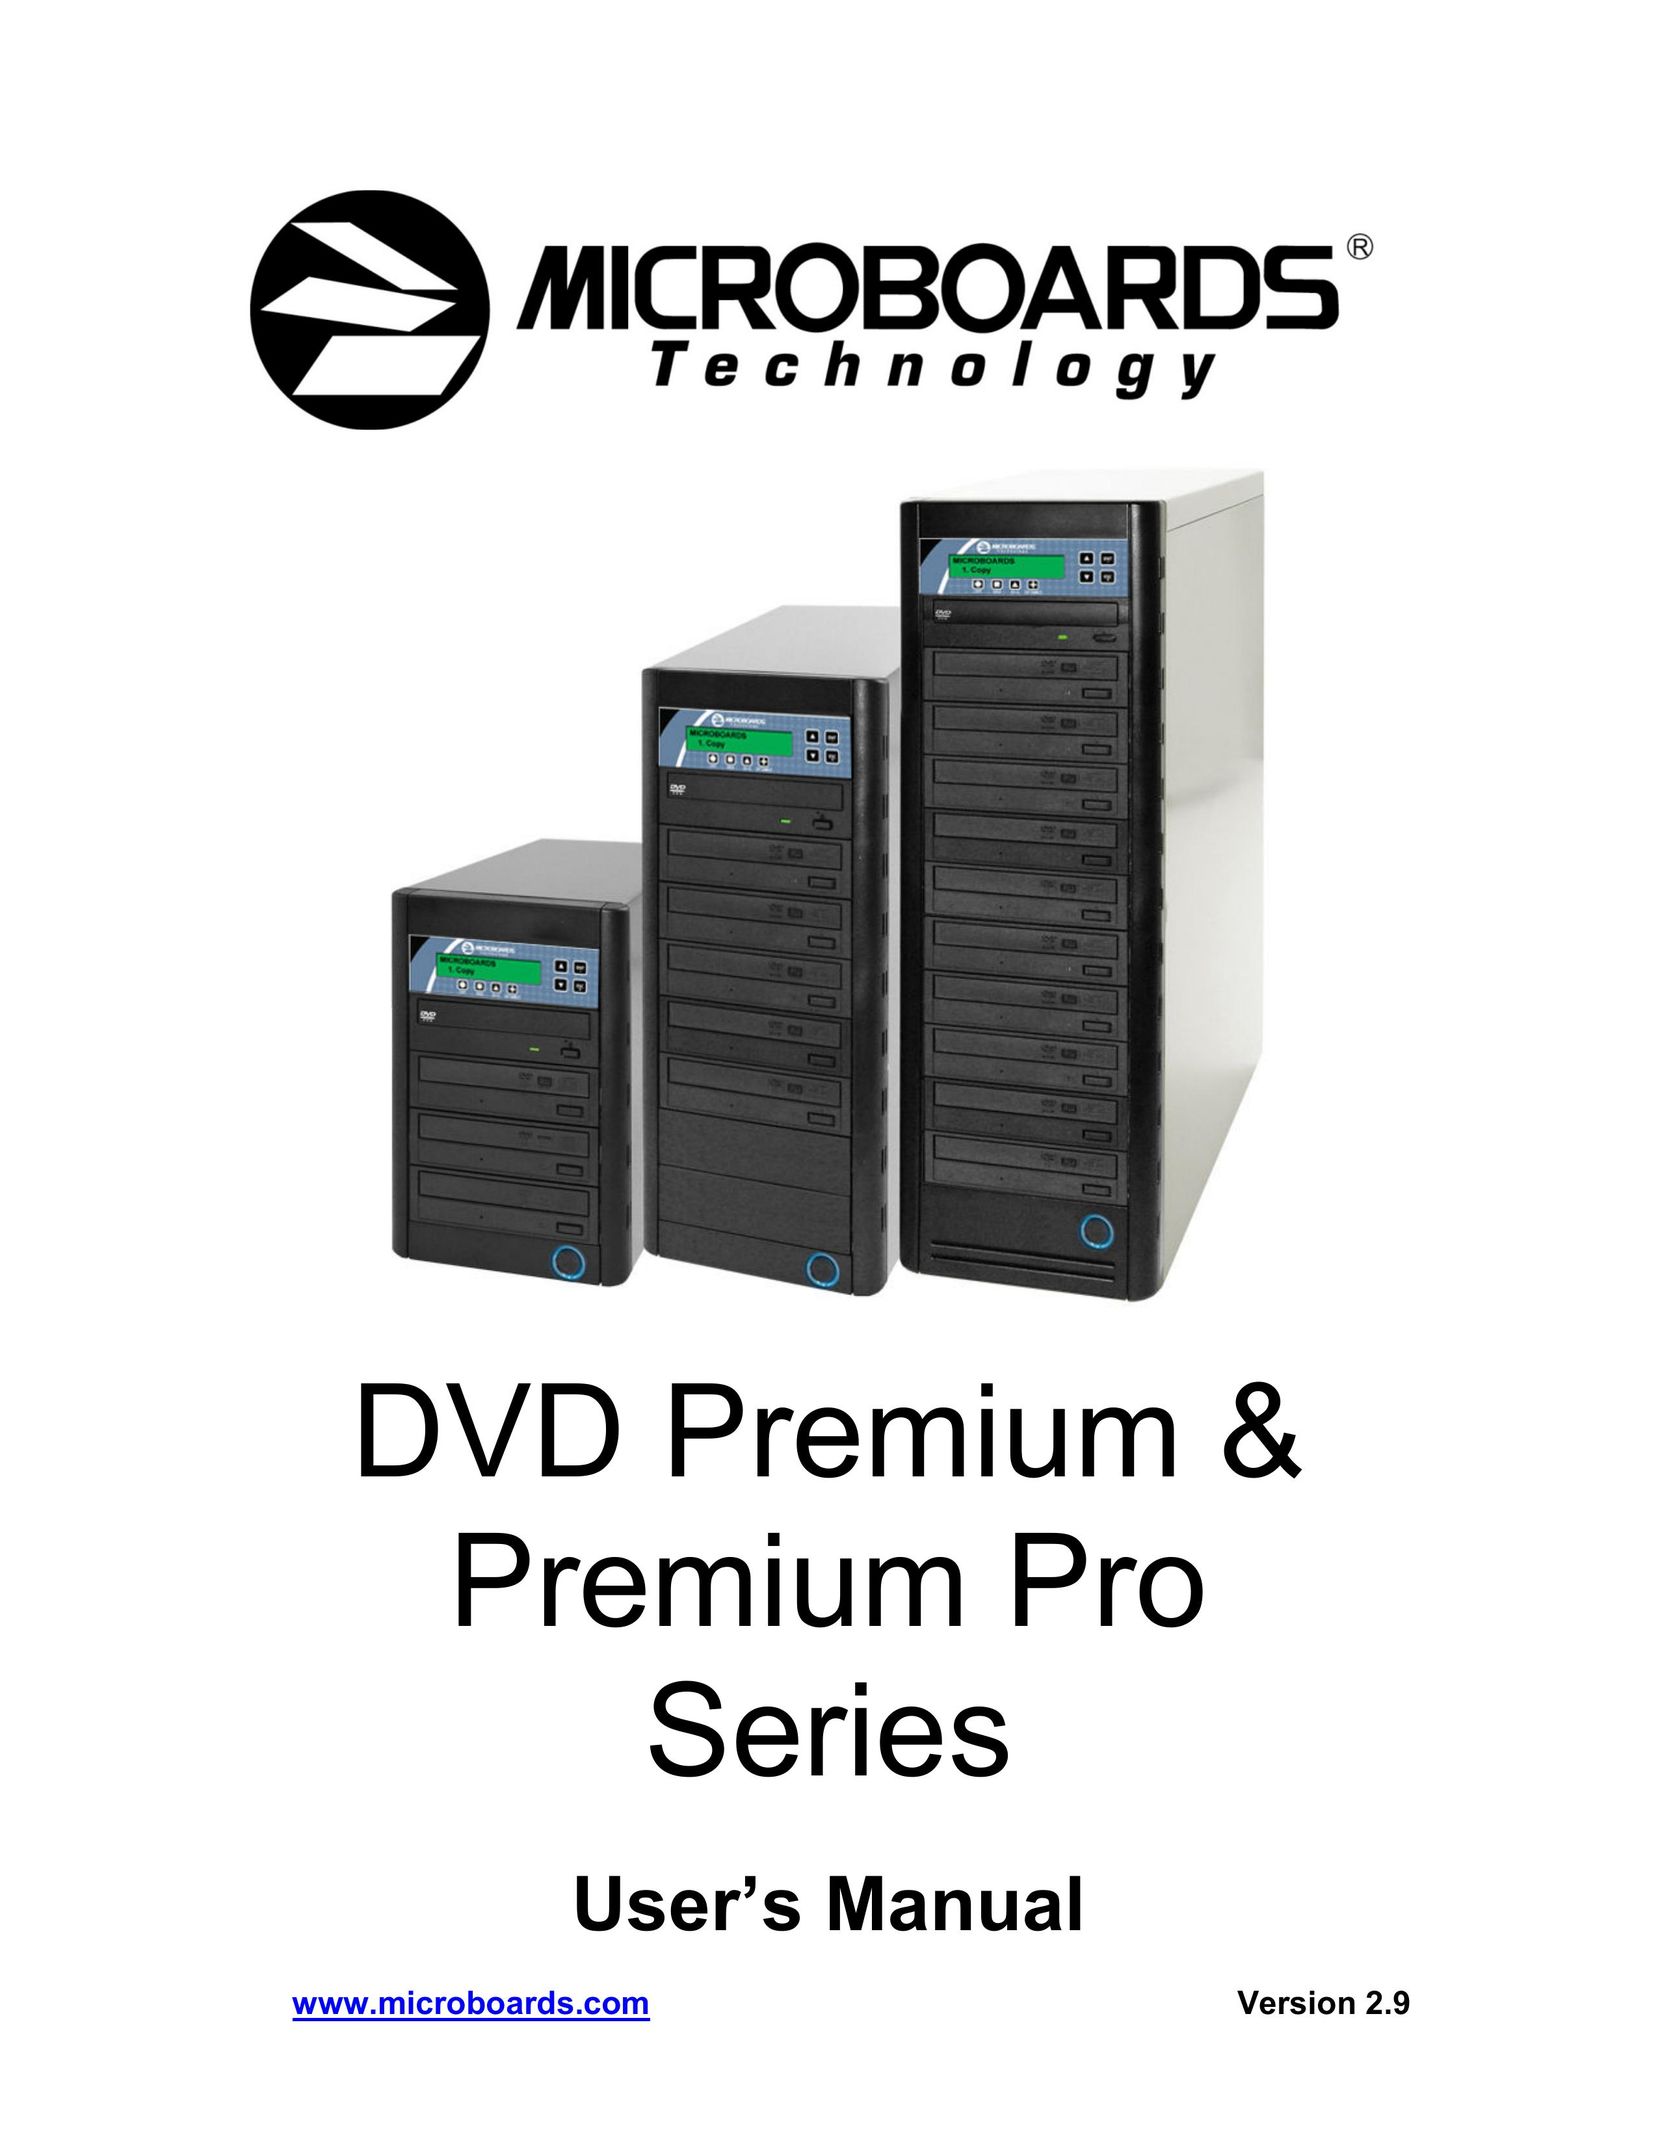 MicroBoards Technology 13570 DVD Recorder User Manual